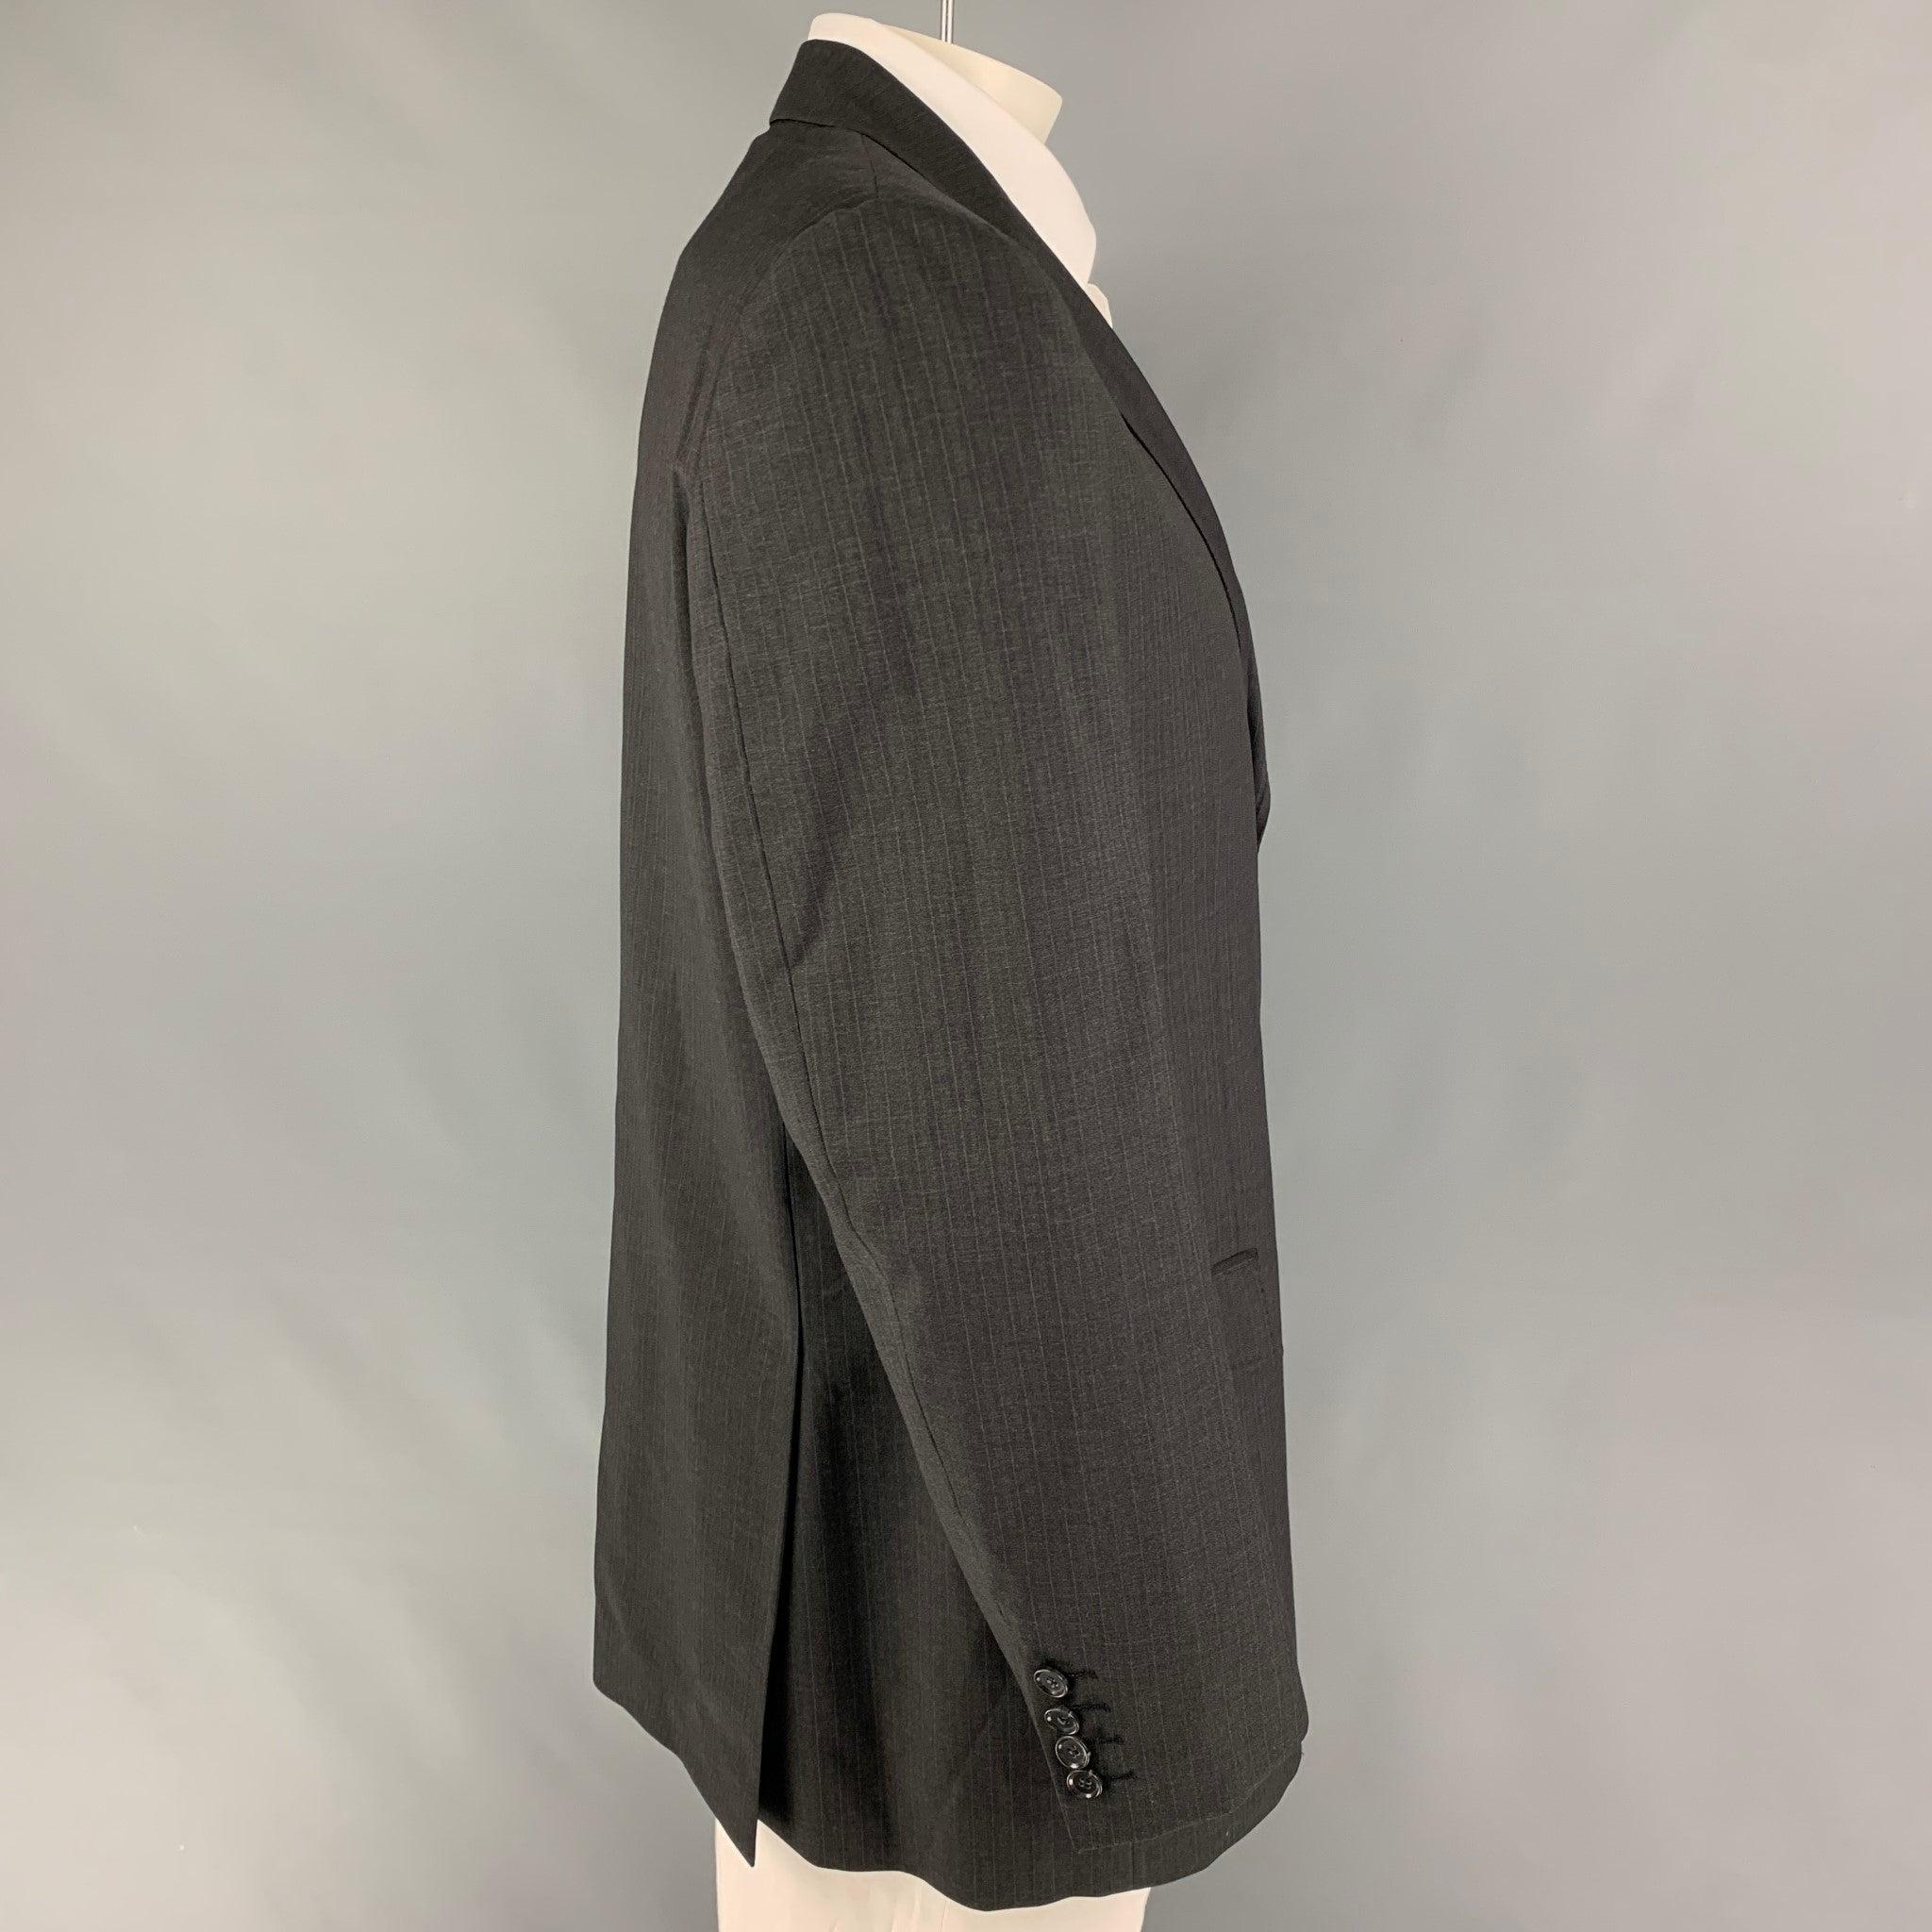 DOLCE & GABBANA sport coat comes in a charcoal pinstripe virgin wool with a full liner featuring a notch lapel, flap pockets, single back vent, and a three button closure. Made in Italy. Very Good Pre-Owned Condition. 

Marked:   Size not visible